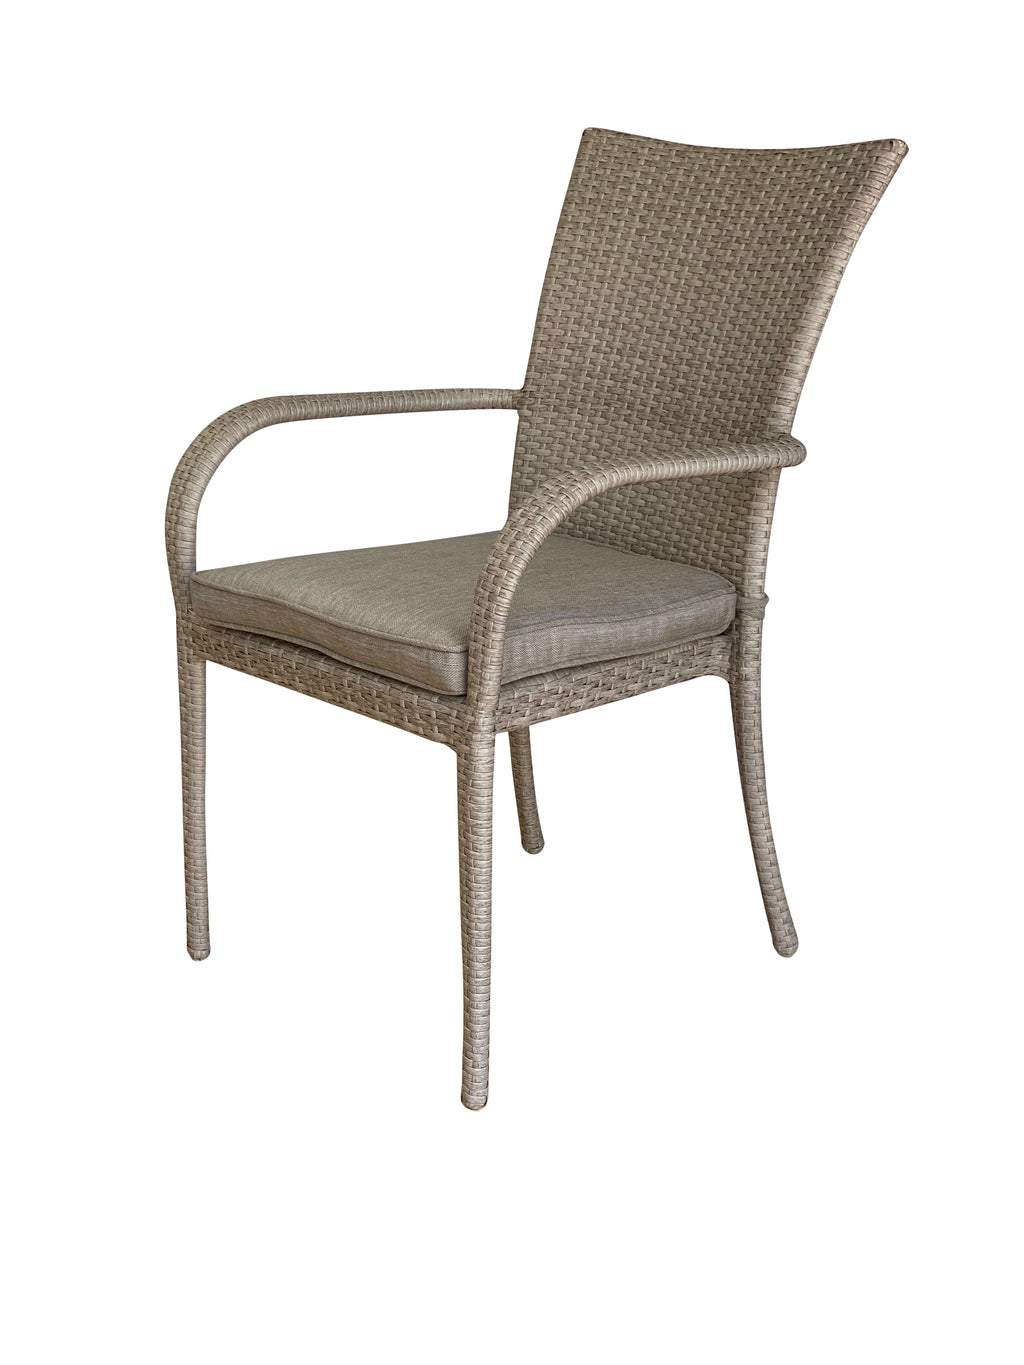 cozy-furniture-outdoor-dining-chair-lucia